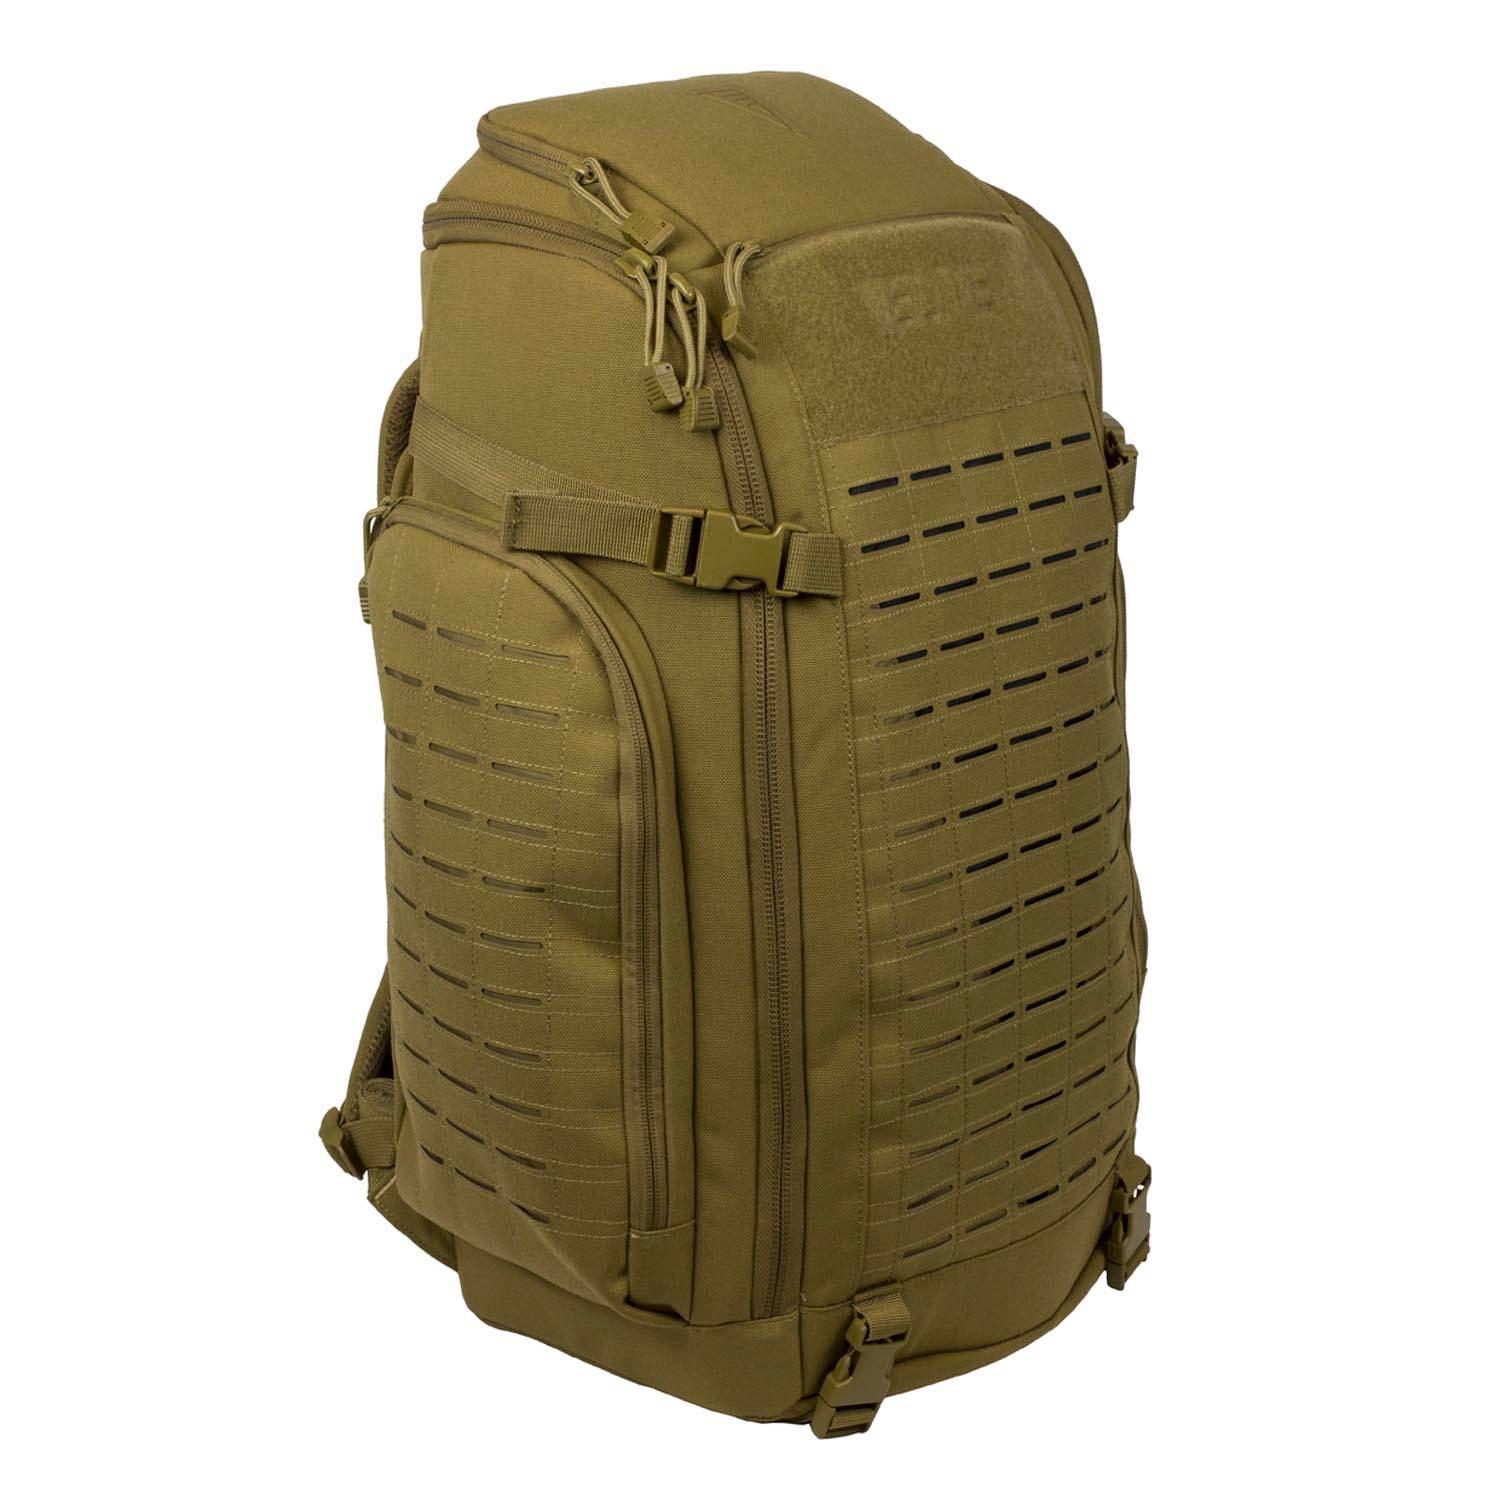 TENACITY-72 3 DAY SUPPORT/SPECIALIZATION BACKPACK 42L